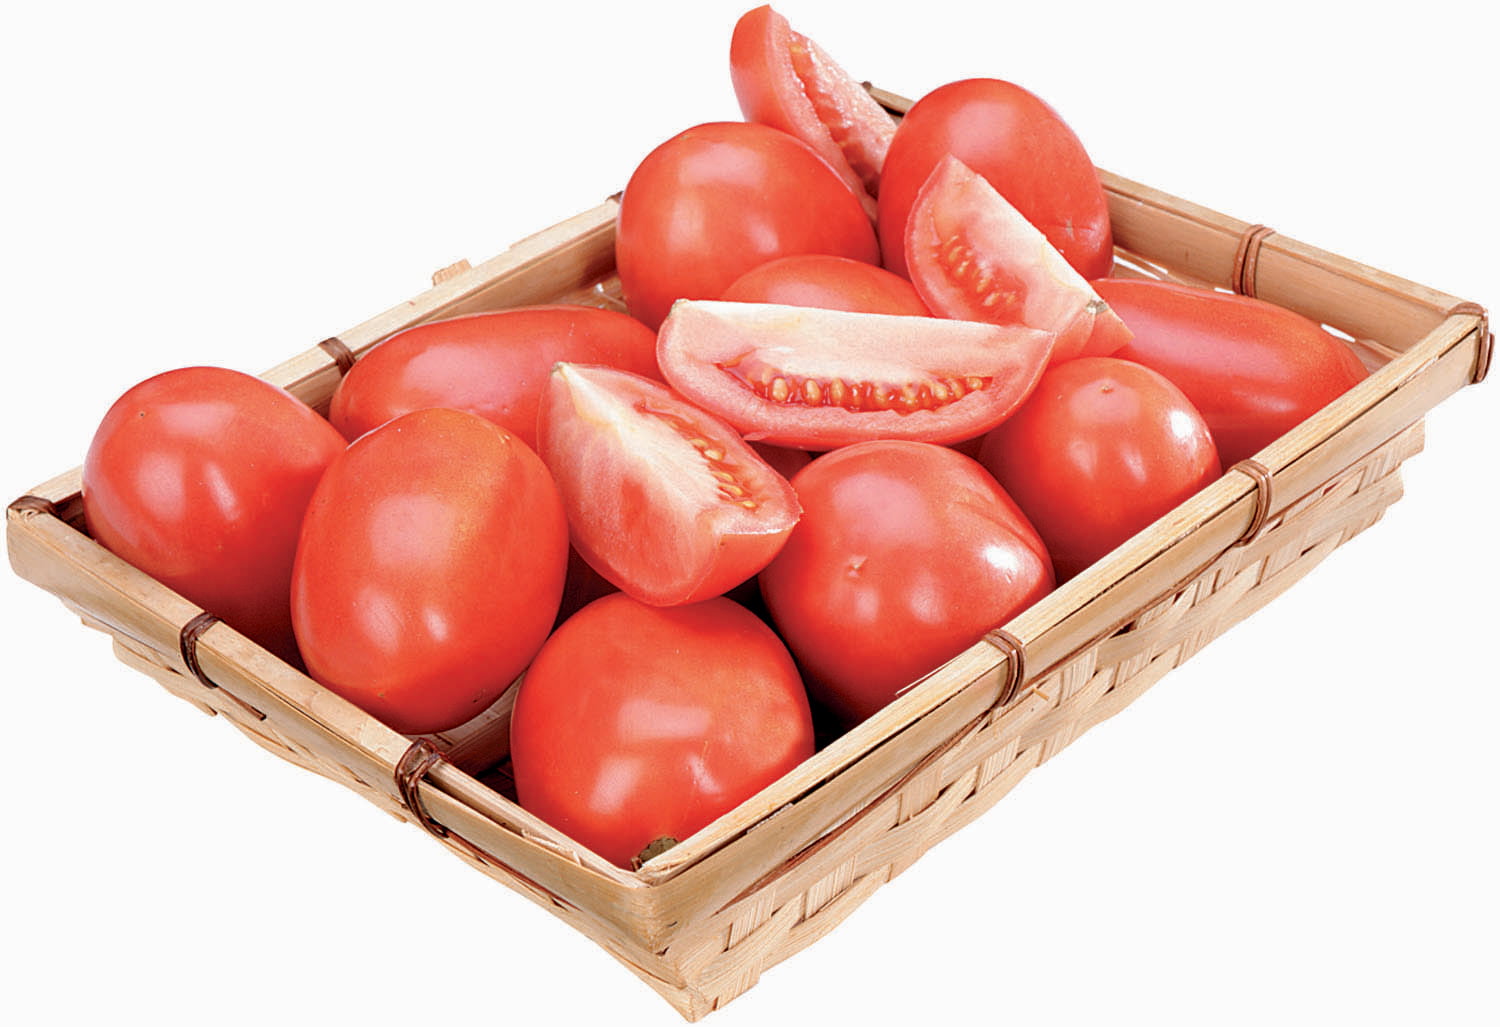 Roma Tomatoes in a Basket Food Picture